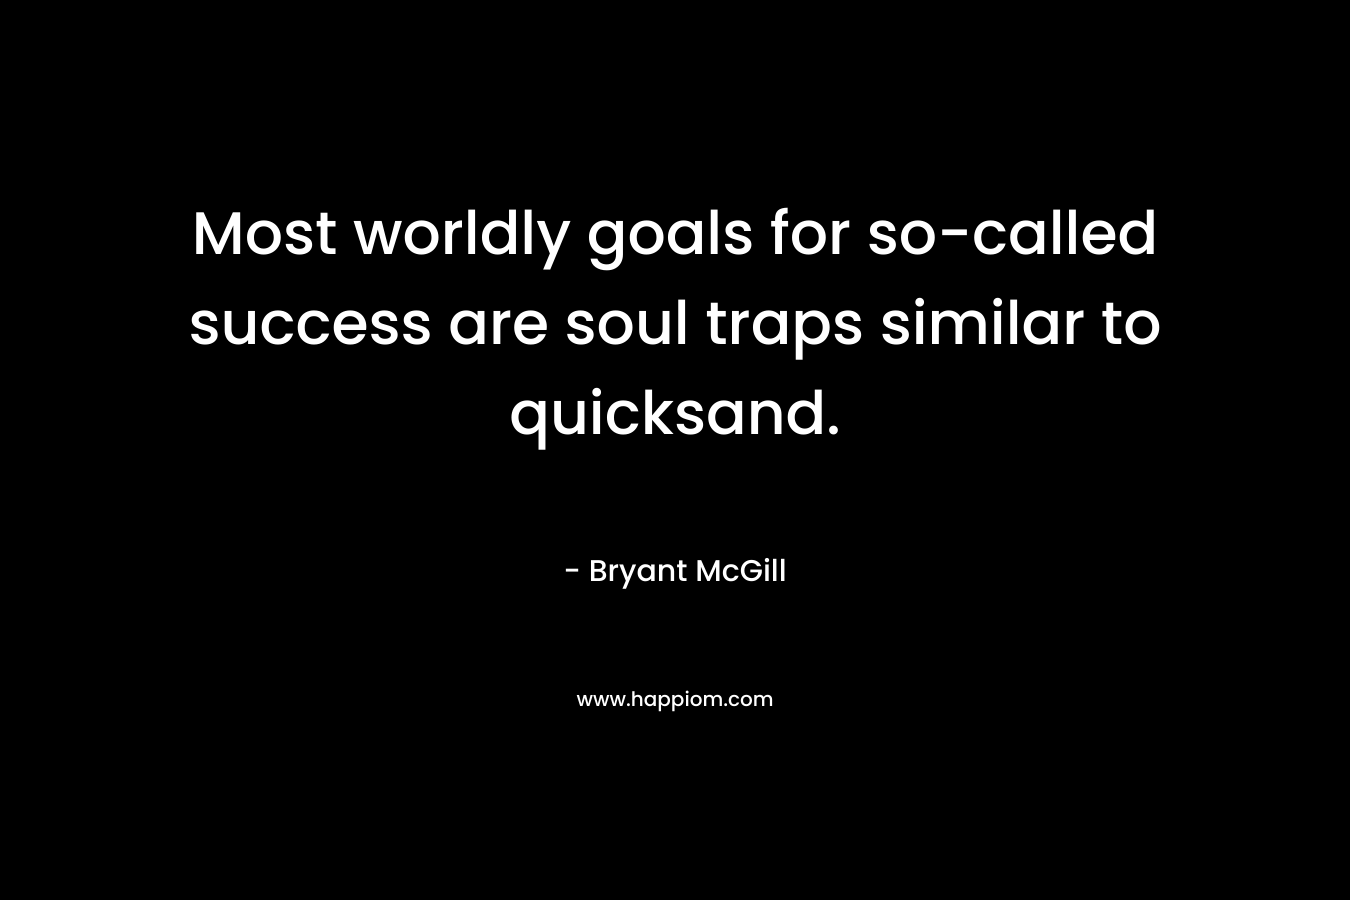 Most worldly goals for so-called success are soul traps similar to quicksand. – Bryant McGill